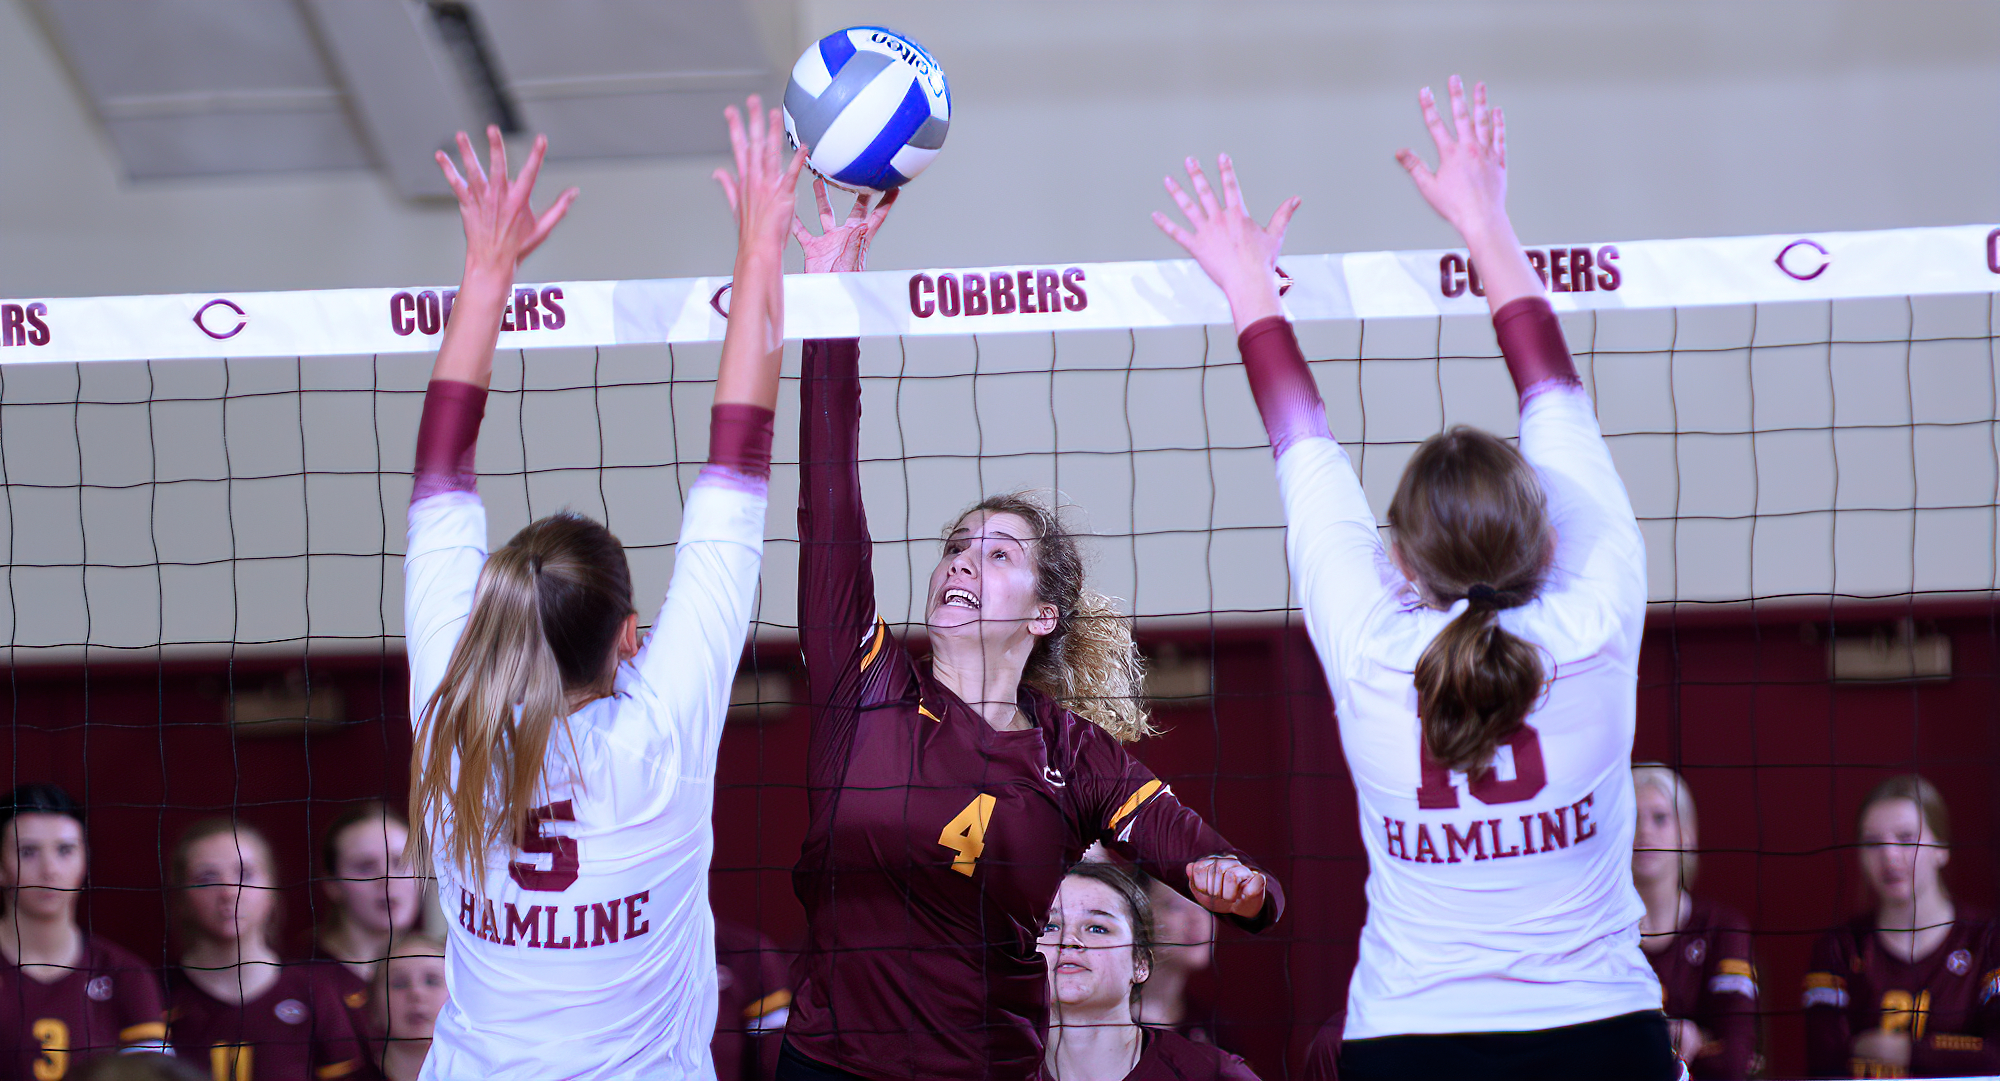 Sophomore Maria Watt tips the ball past the block for one of her career-high 17 kills in the Cobbers' thrilling 5-set victory over Hamline in the home finale.